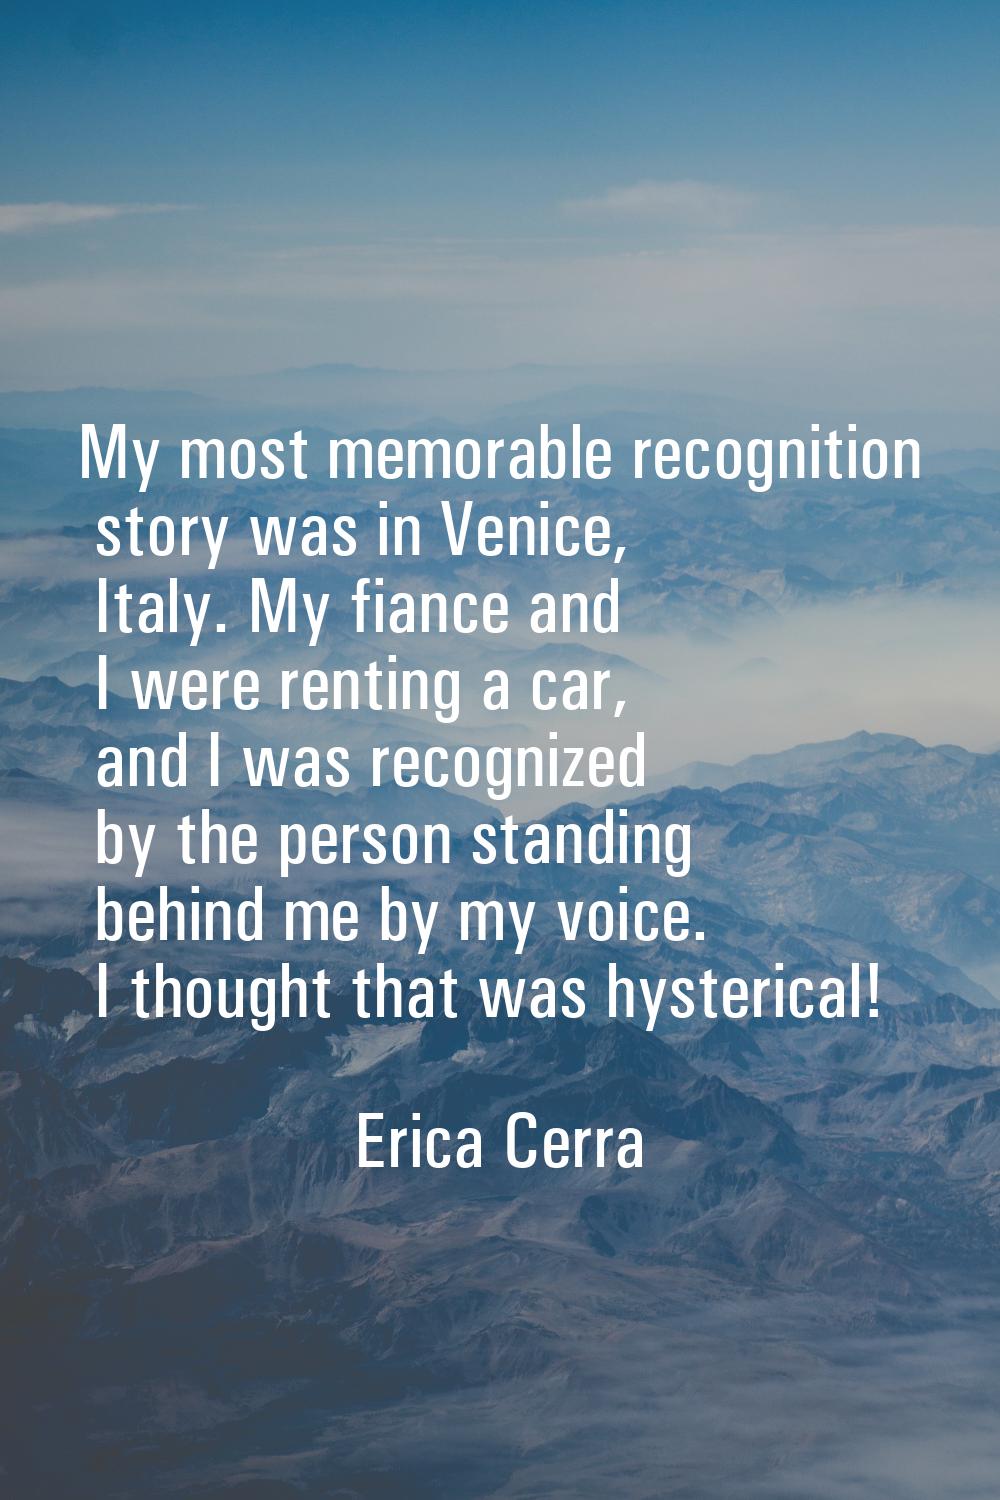 My most memorable recognition story was in Venice, Italy. My fiance and I were renting a car, and I